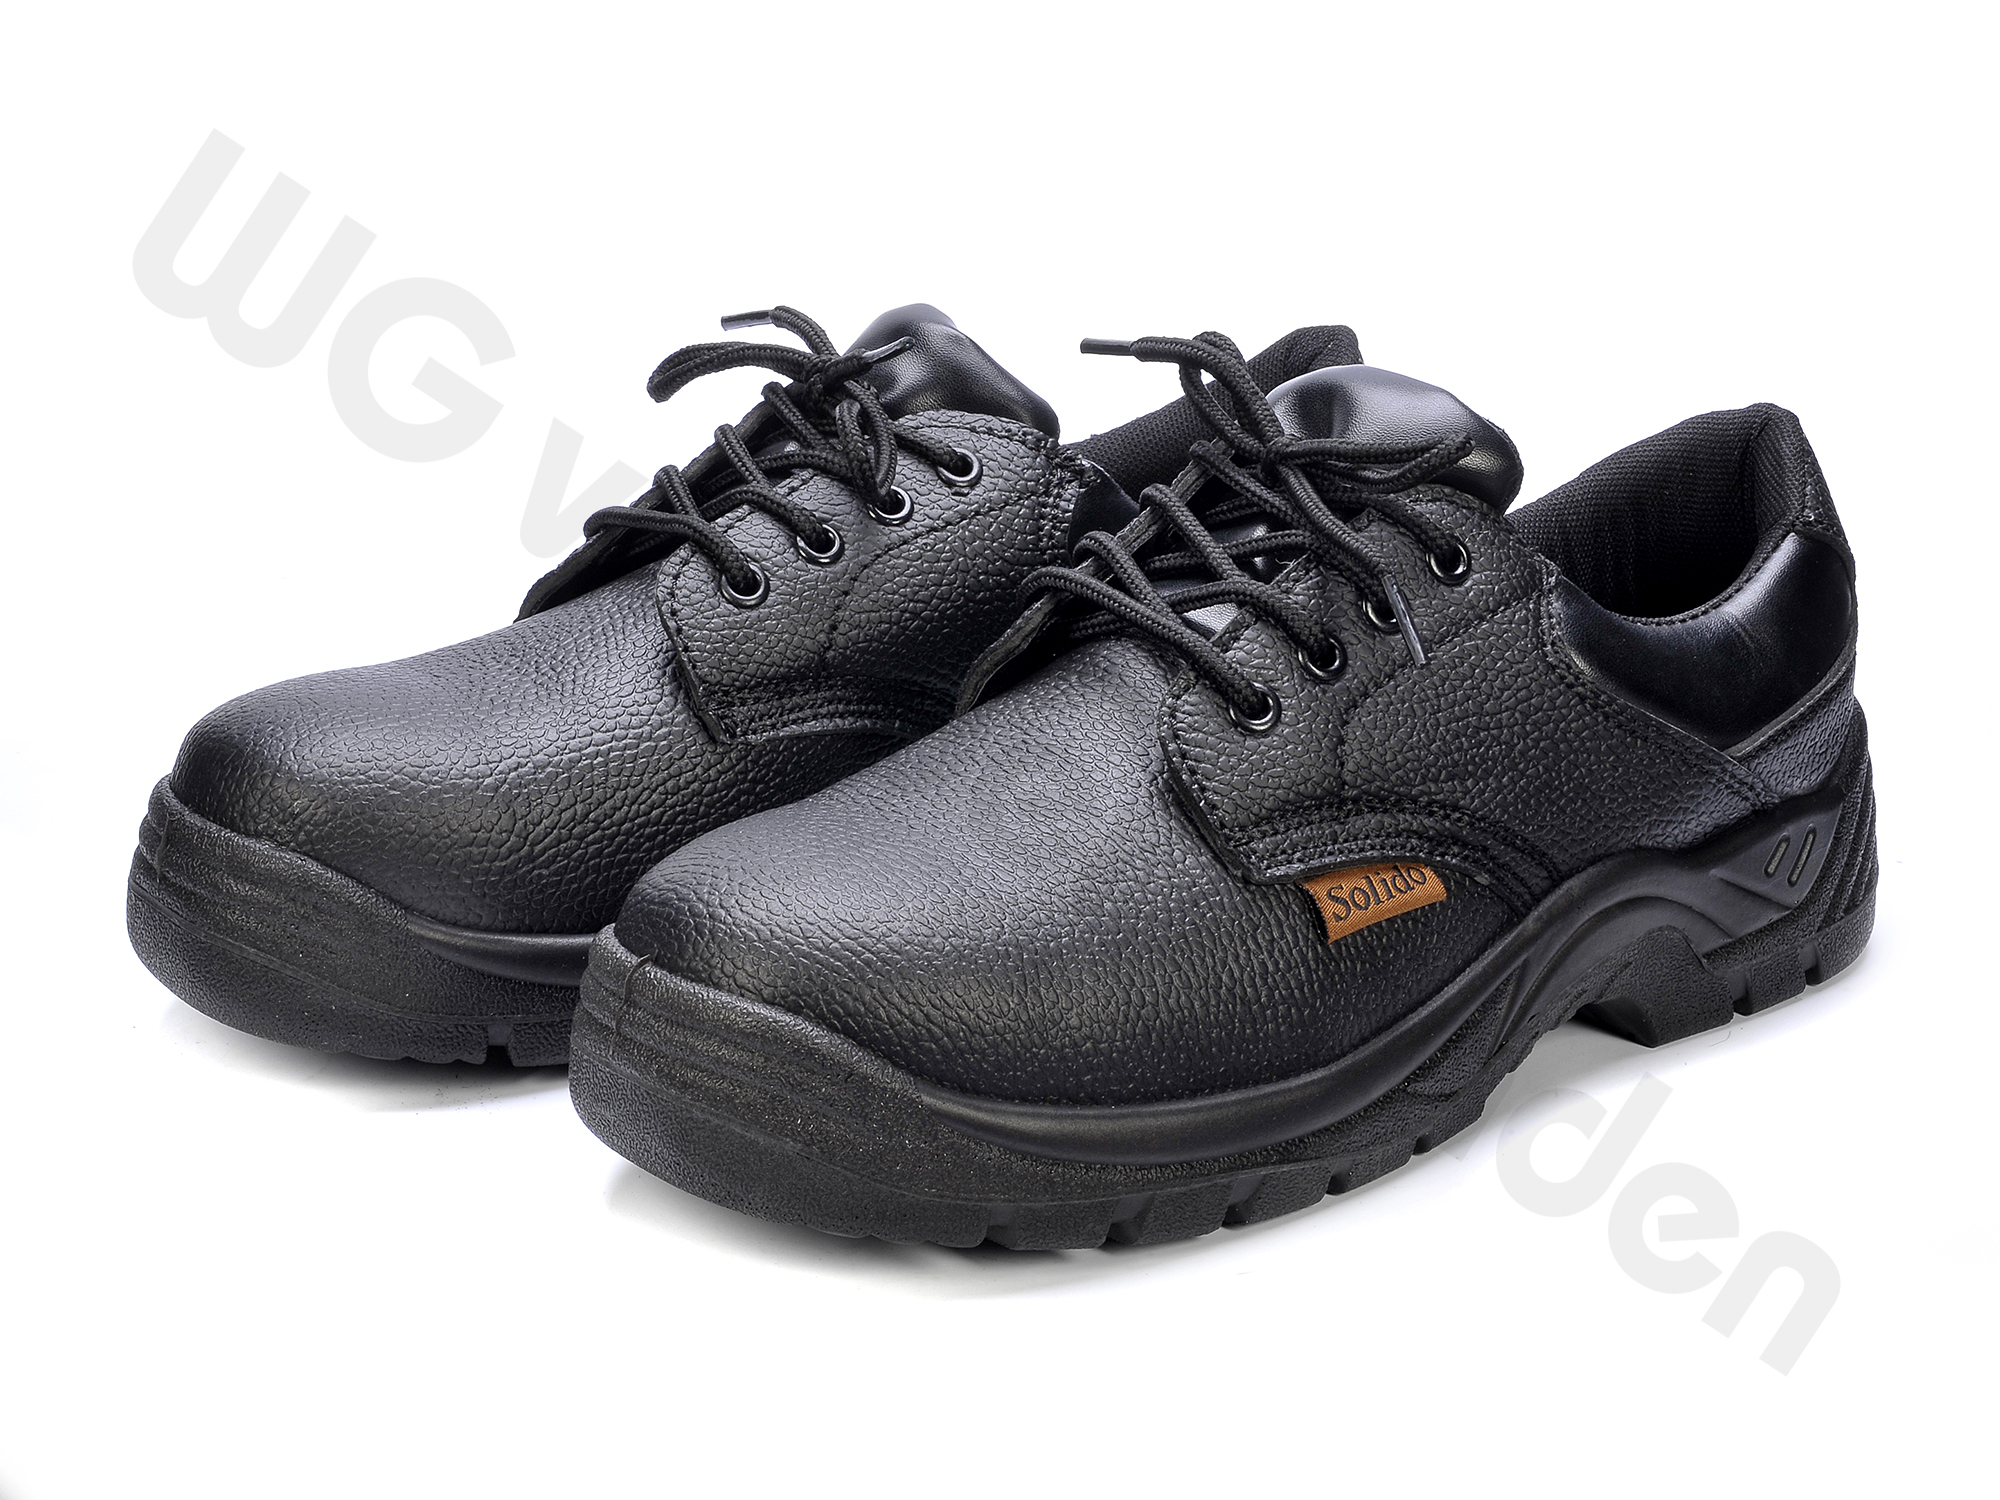 880600 SHOES SAFETY S1 WITH STEEL TOE SIZE 37 / 24.5CM CE